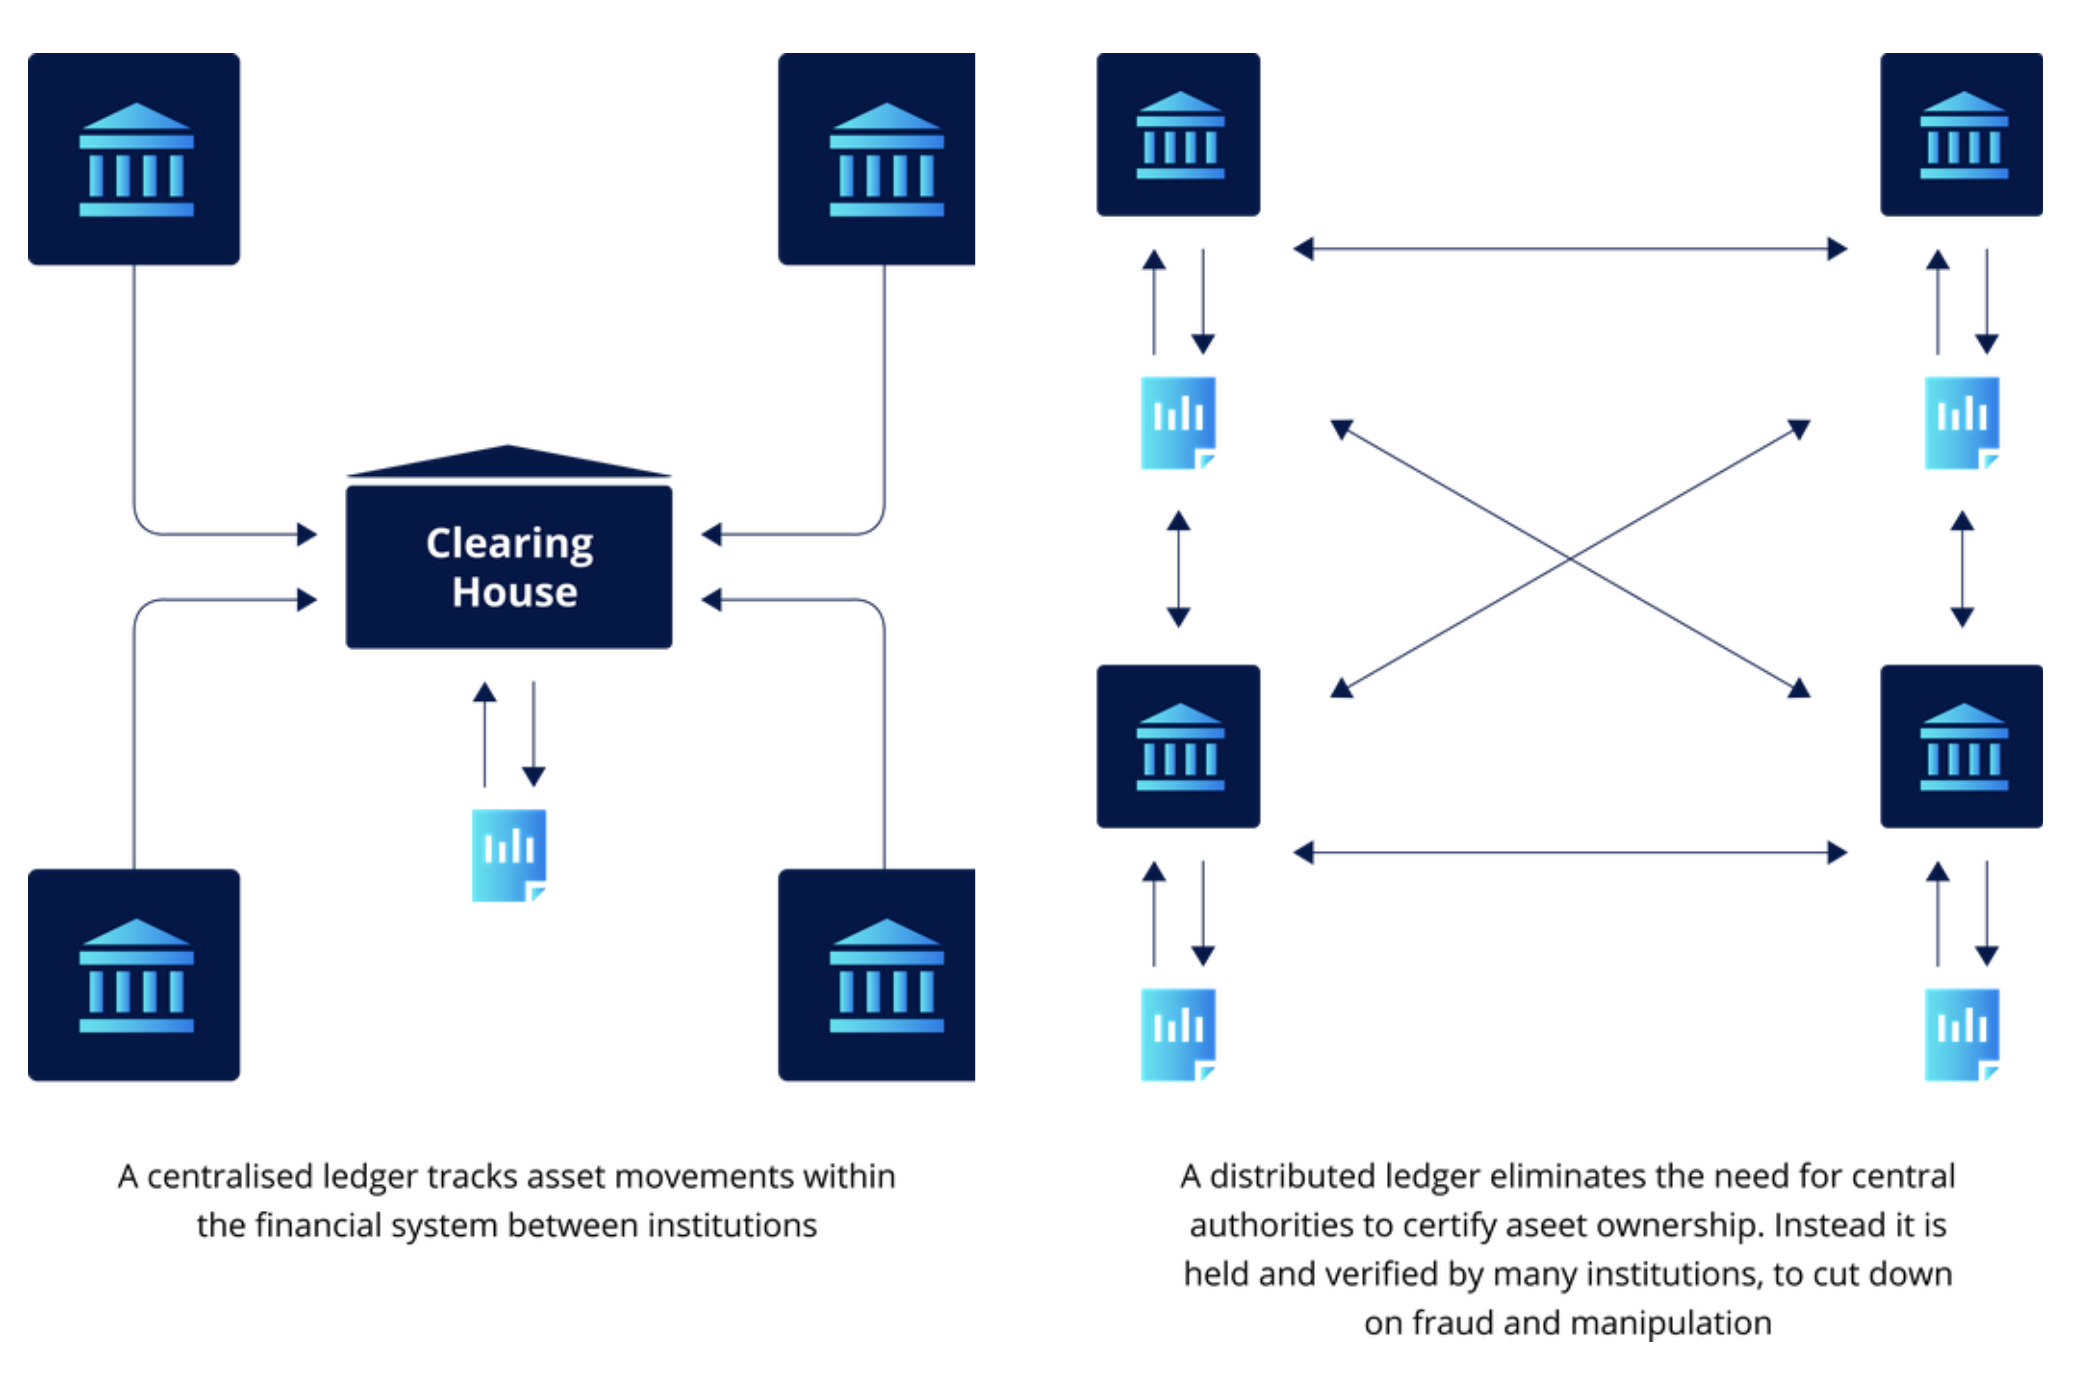 Graphic of blockchain technology. A centralised ledger tracks asset movements within the financial system between institutions. A distributed ledger eliminates the need for central authorities to certify aseet ownership. Instead it is held and verified by many institutions, to cut down on fraud and manipulation.